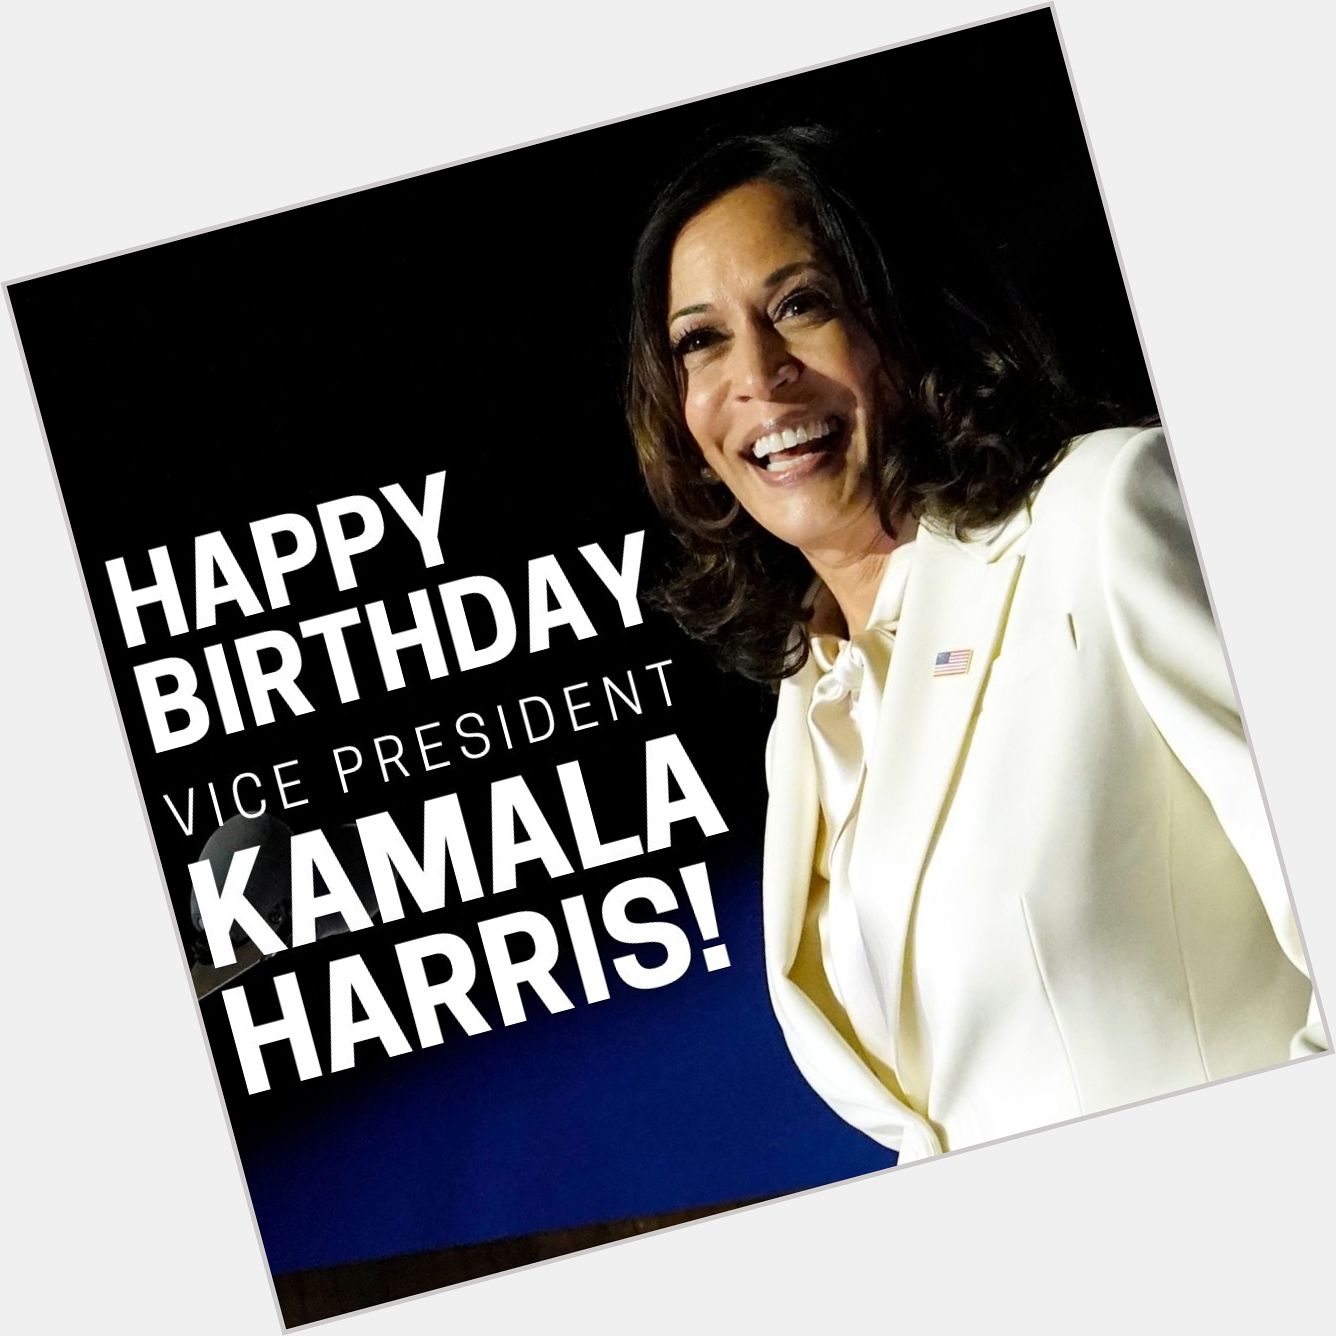 Happy Birthday to Vice President Kamala Harris! What\s your message for VP Harris on her special day?  